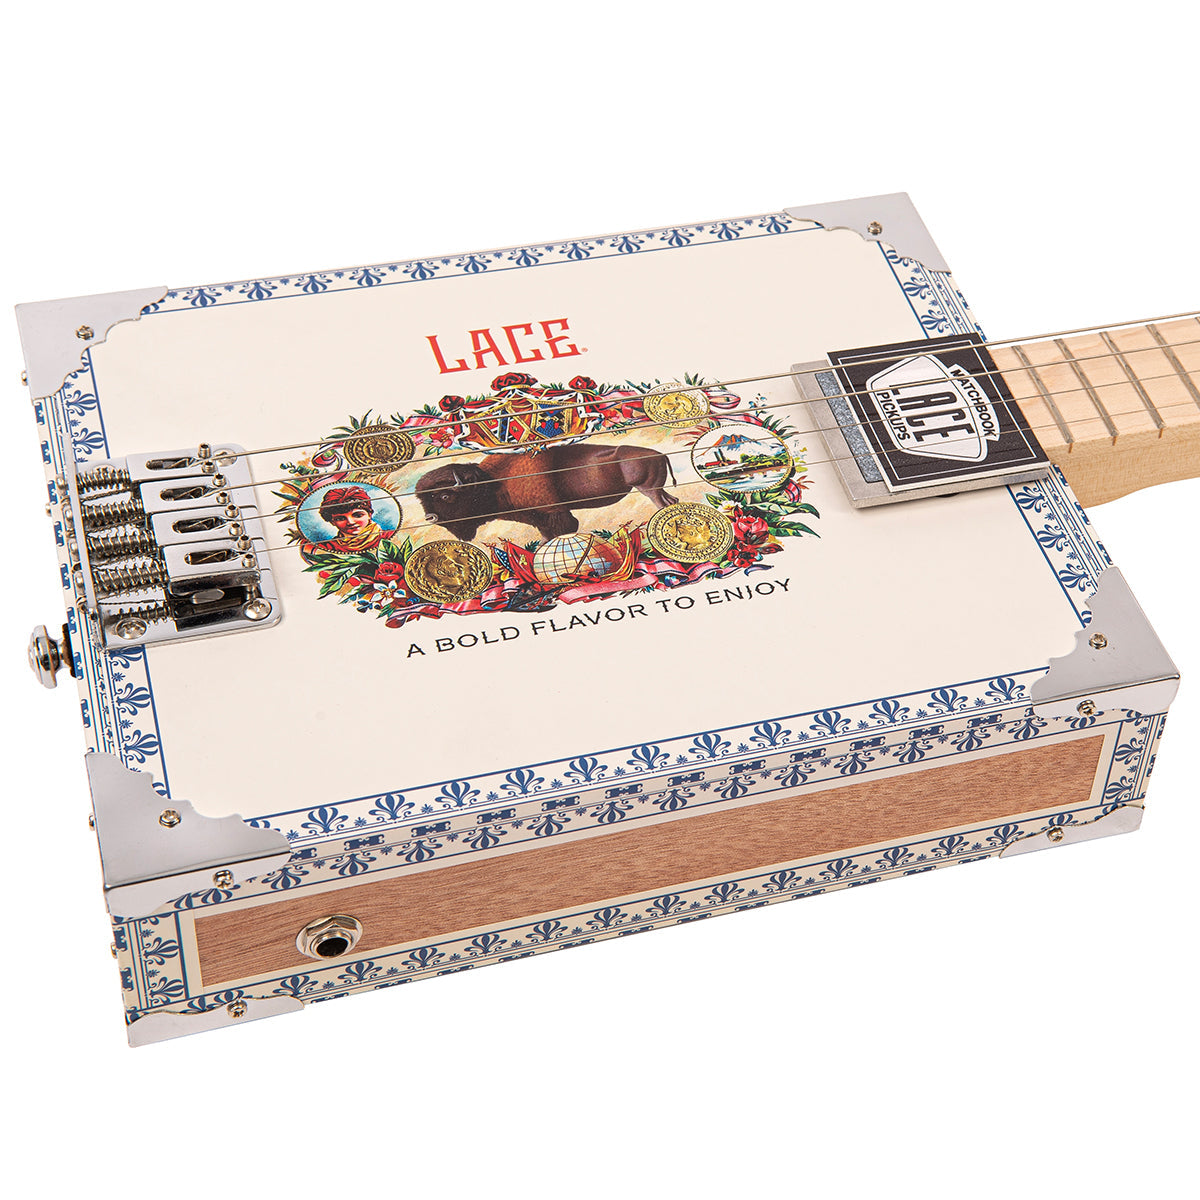 Lace Cigar Box Electric Guitar ~ 4 String ~ Buffalo Bill, Electric Guitars for sale at Richards Guitars.